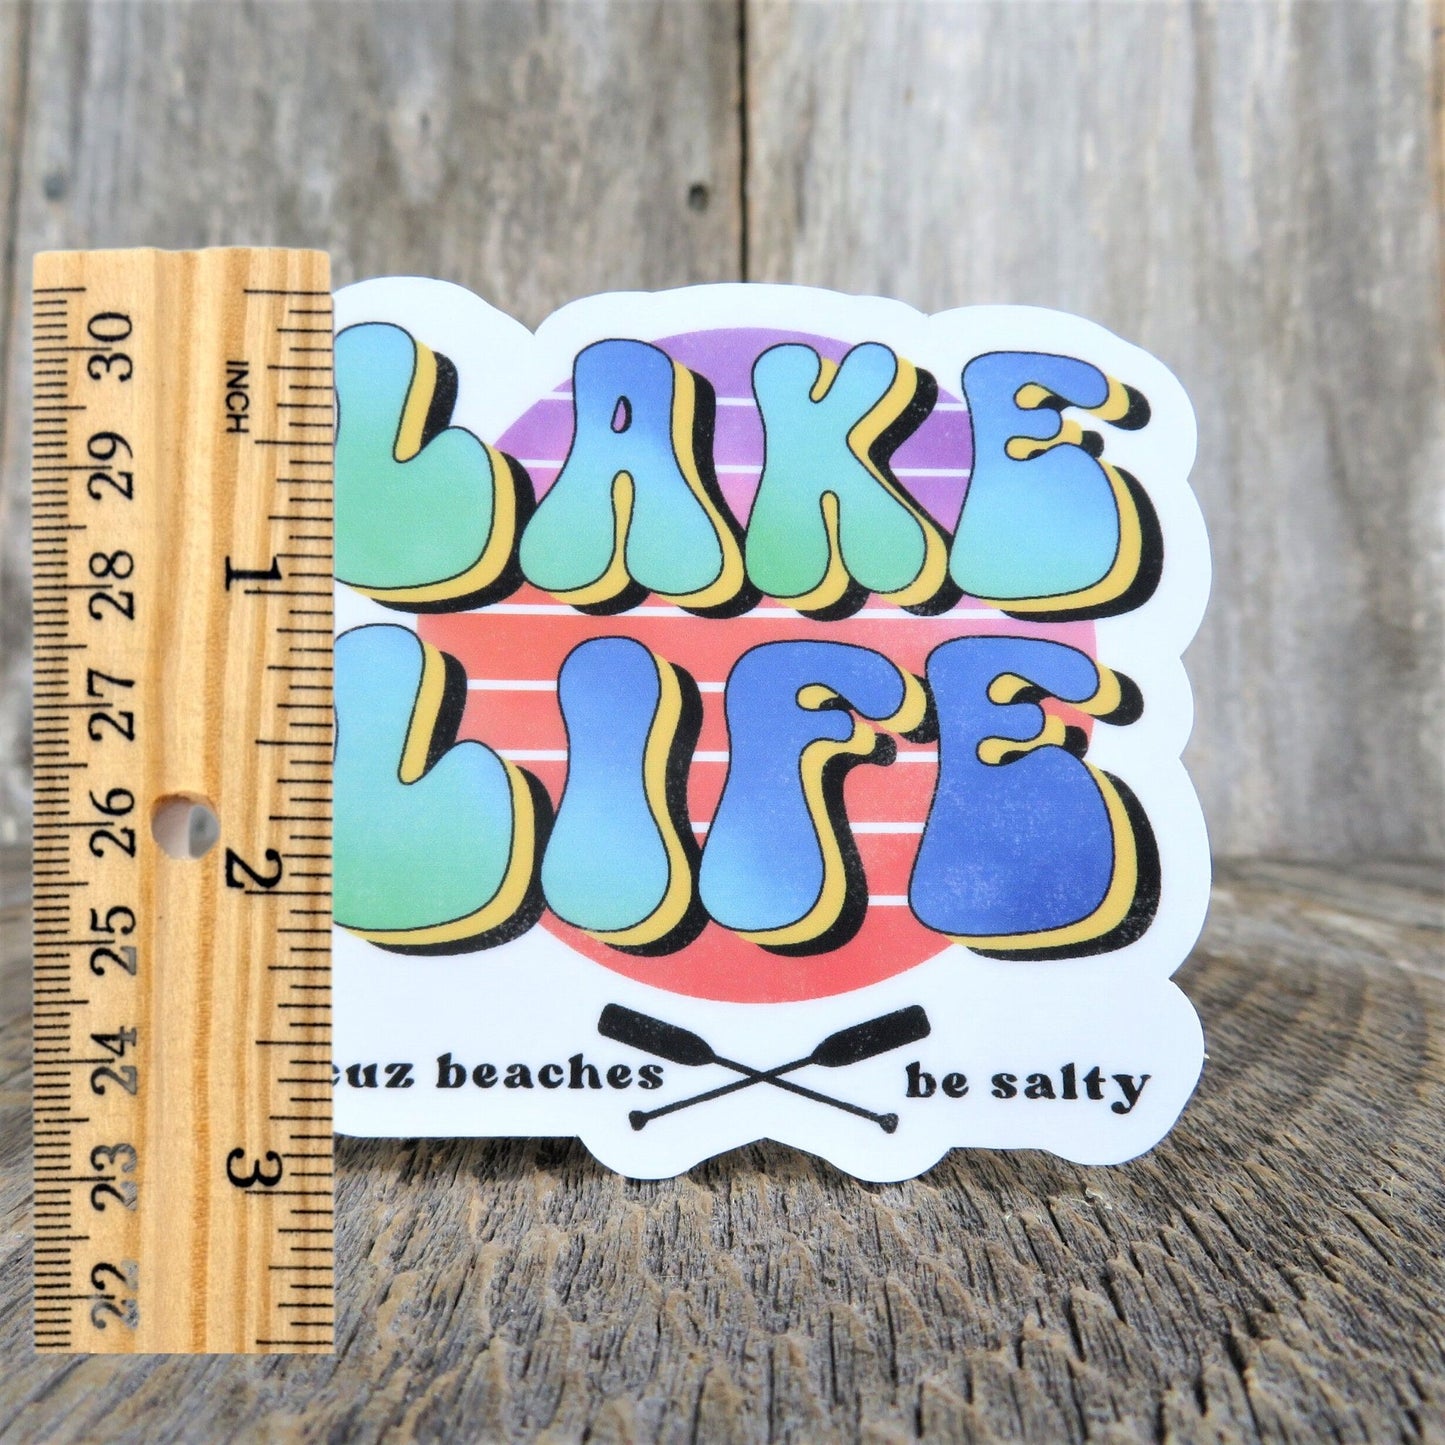 Lake Life Cuz Beaches Be Salty Sticker Lake Lover Camping Outdoors Retro Colors Waterproof